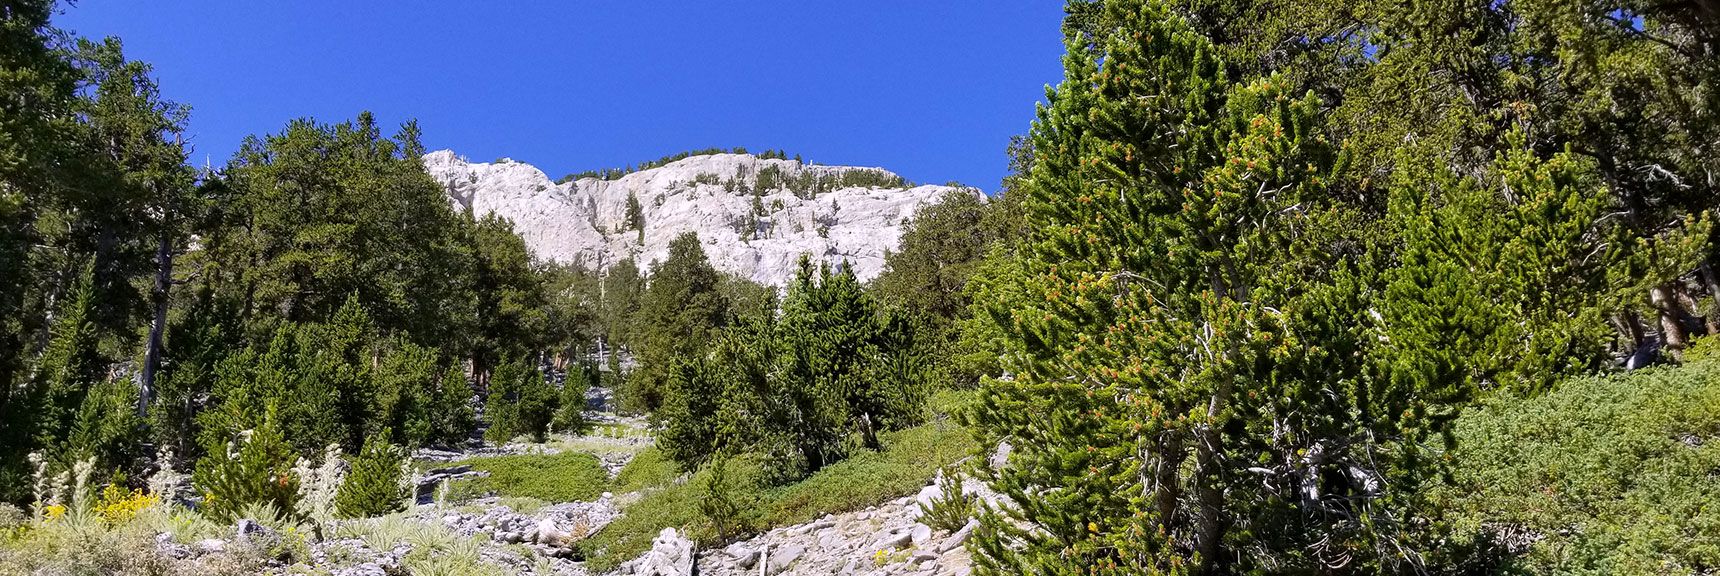 Looking Up the Delta Wash Canyon Toward Mummy Mt. East Summit Approach in Mt. Charleston Wilderness, Nevada